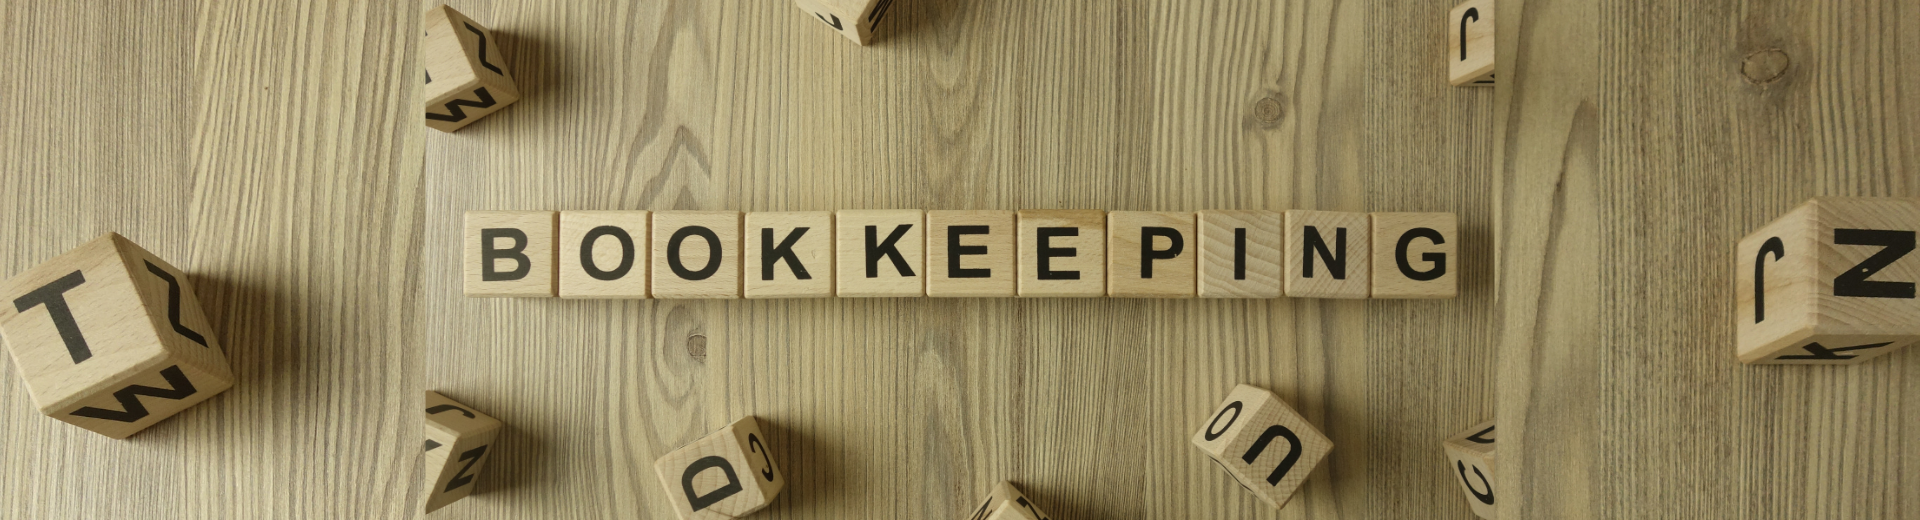 Bookkeeping spelled out with wooden blocks